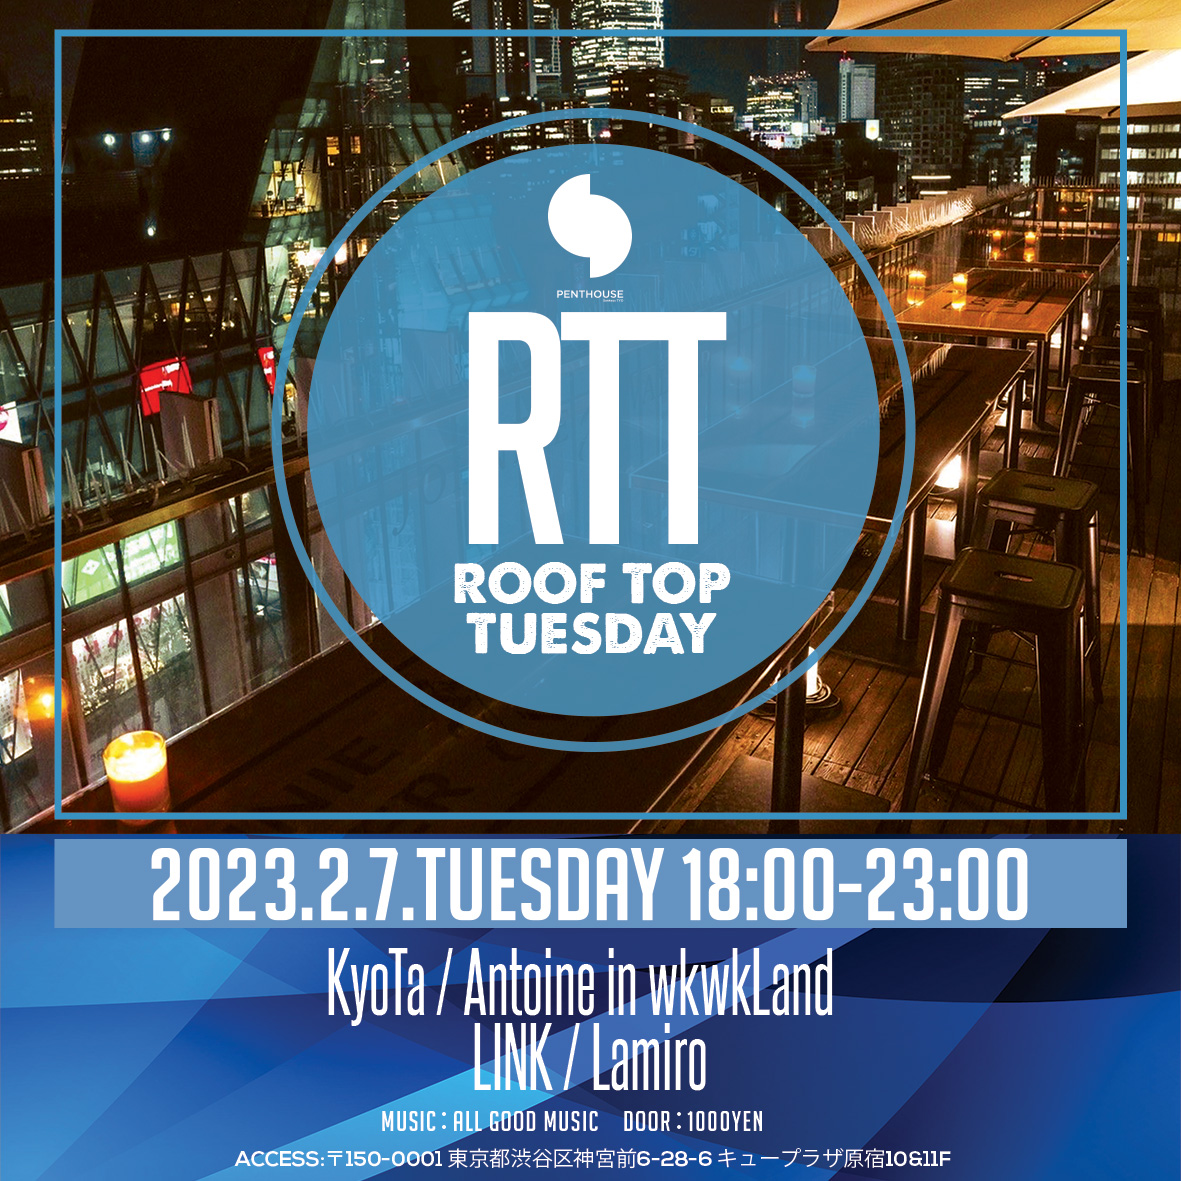 ROOF TOP Tuesday